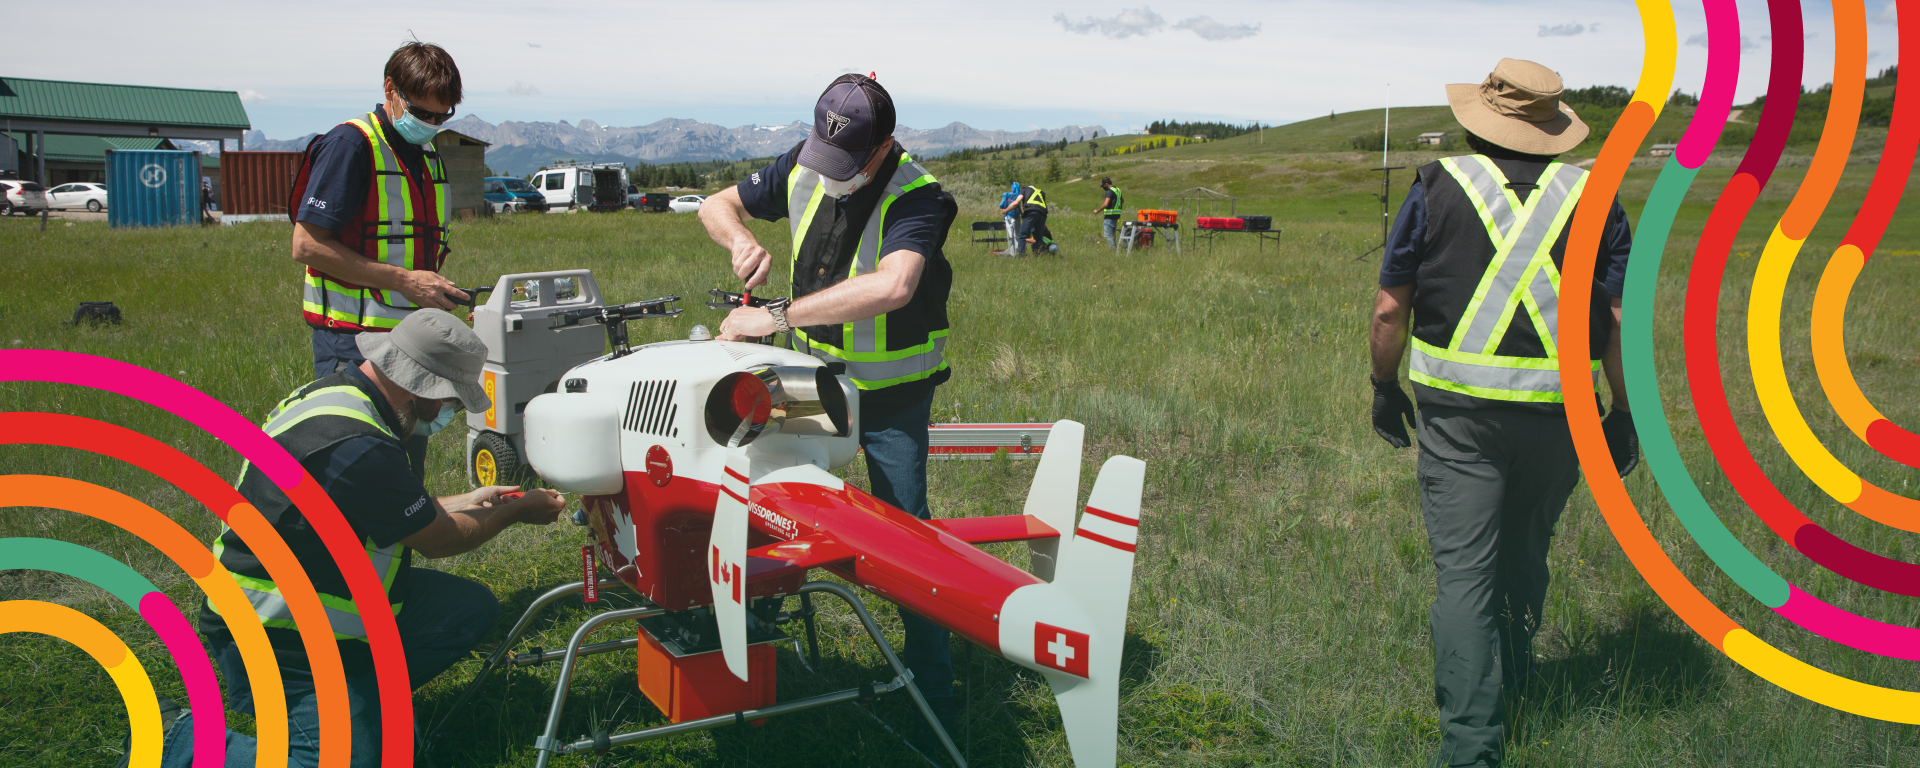 Photo of four people working in the field with a drone that delivers medical supplies